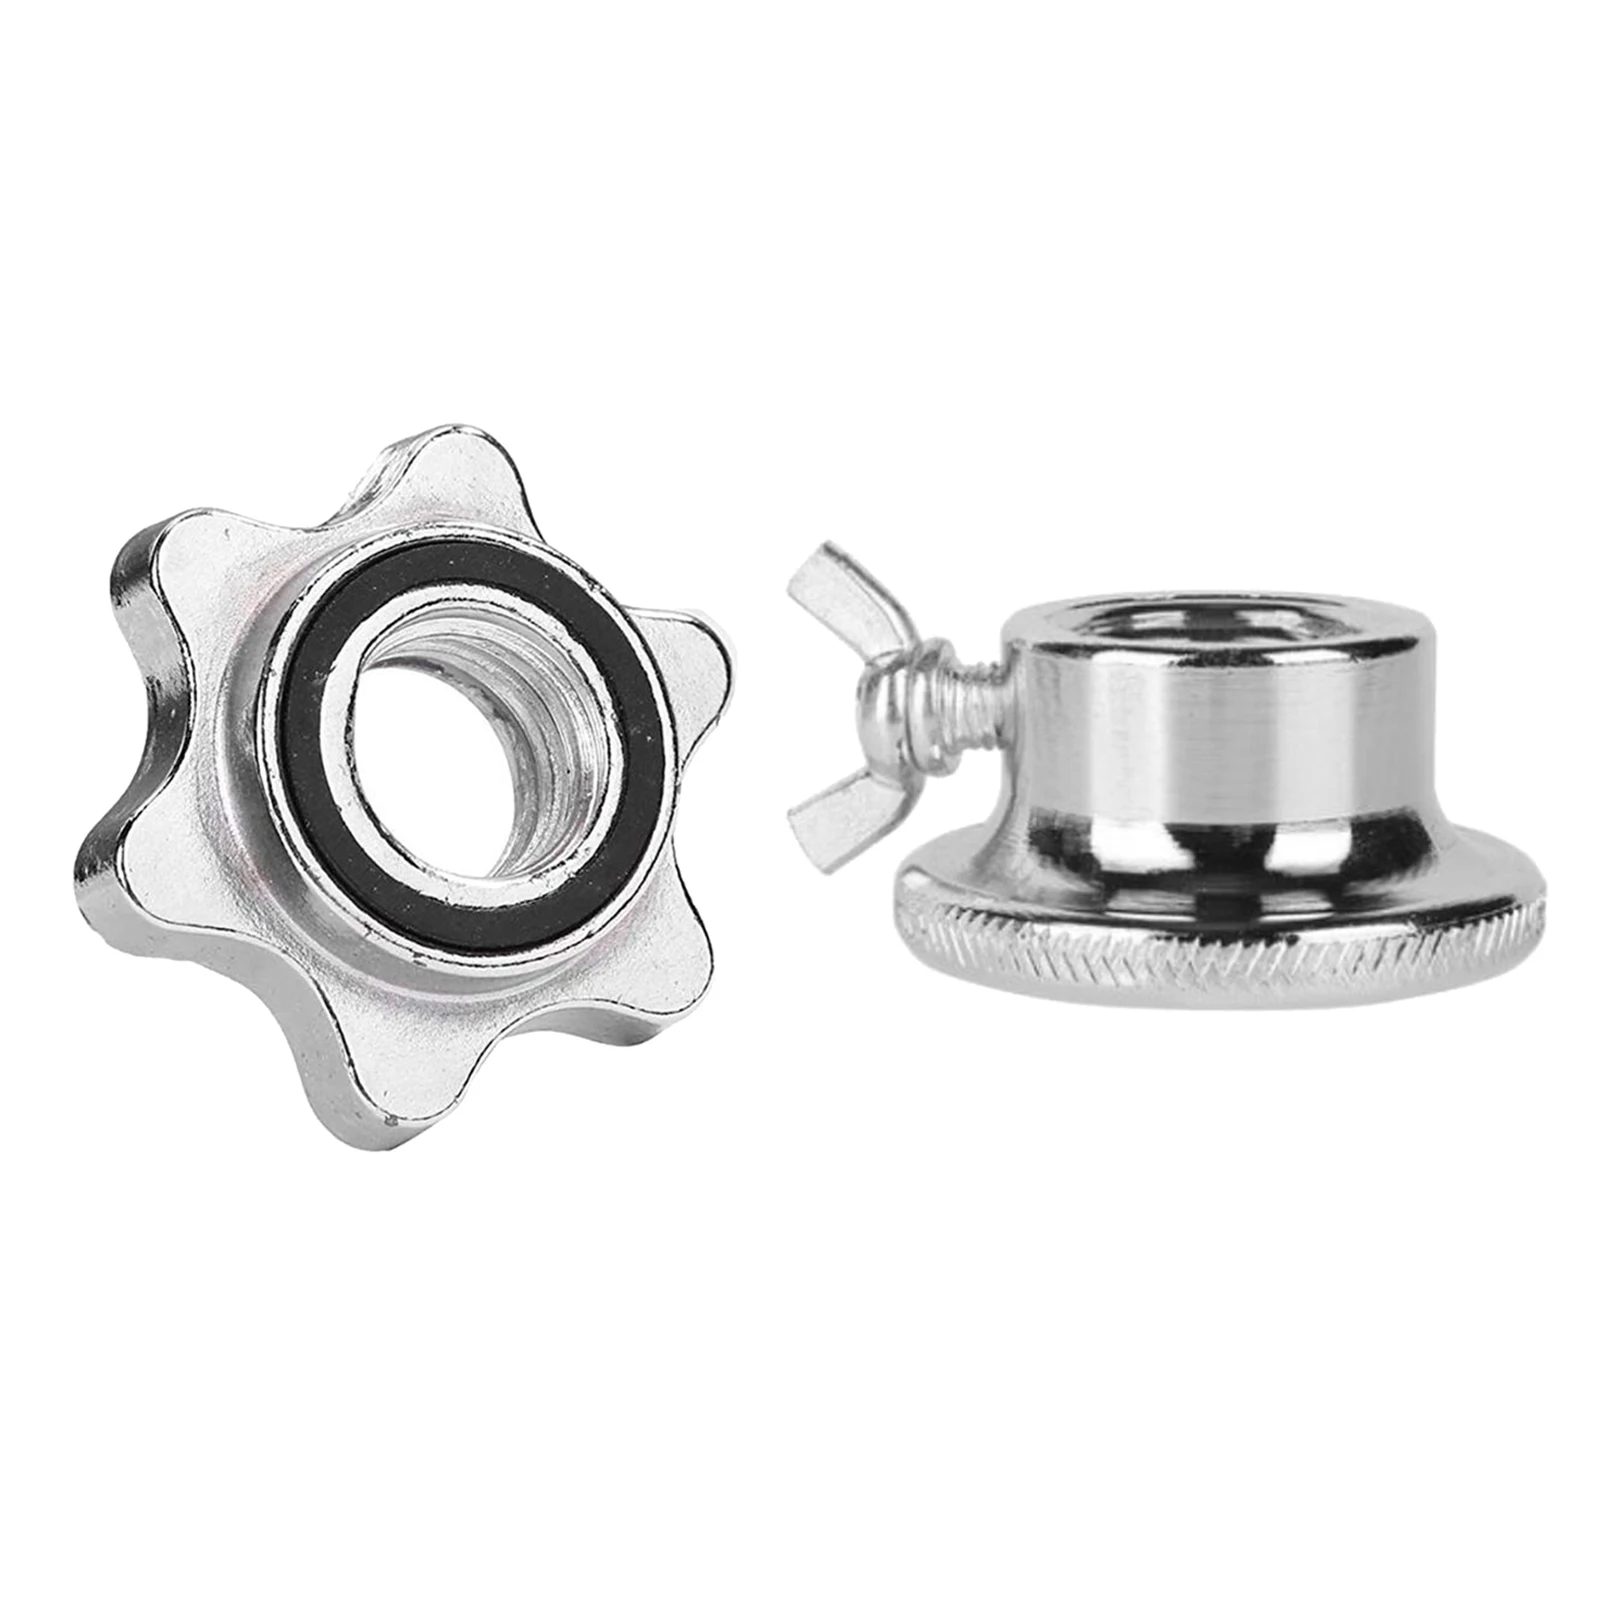 Spin-lock Dumbell Nut Barbell Bar Collar Screw TAOJIN Hexagon Nut Barbell Hexagon Nut Solid Steel Clamps Dumbell Weight Lifting Accessories Metal,silver 